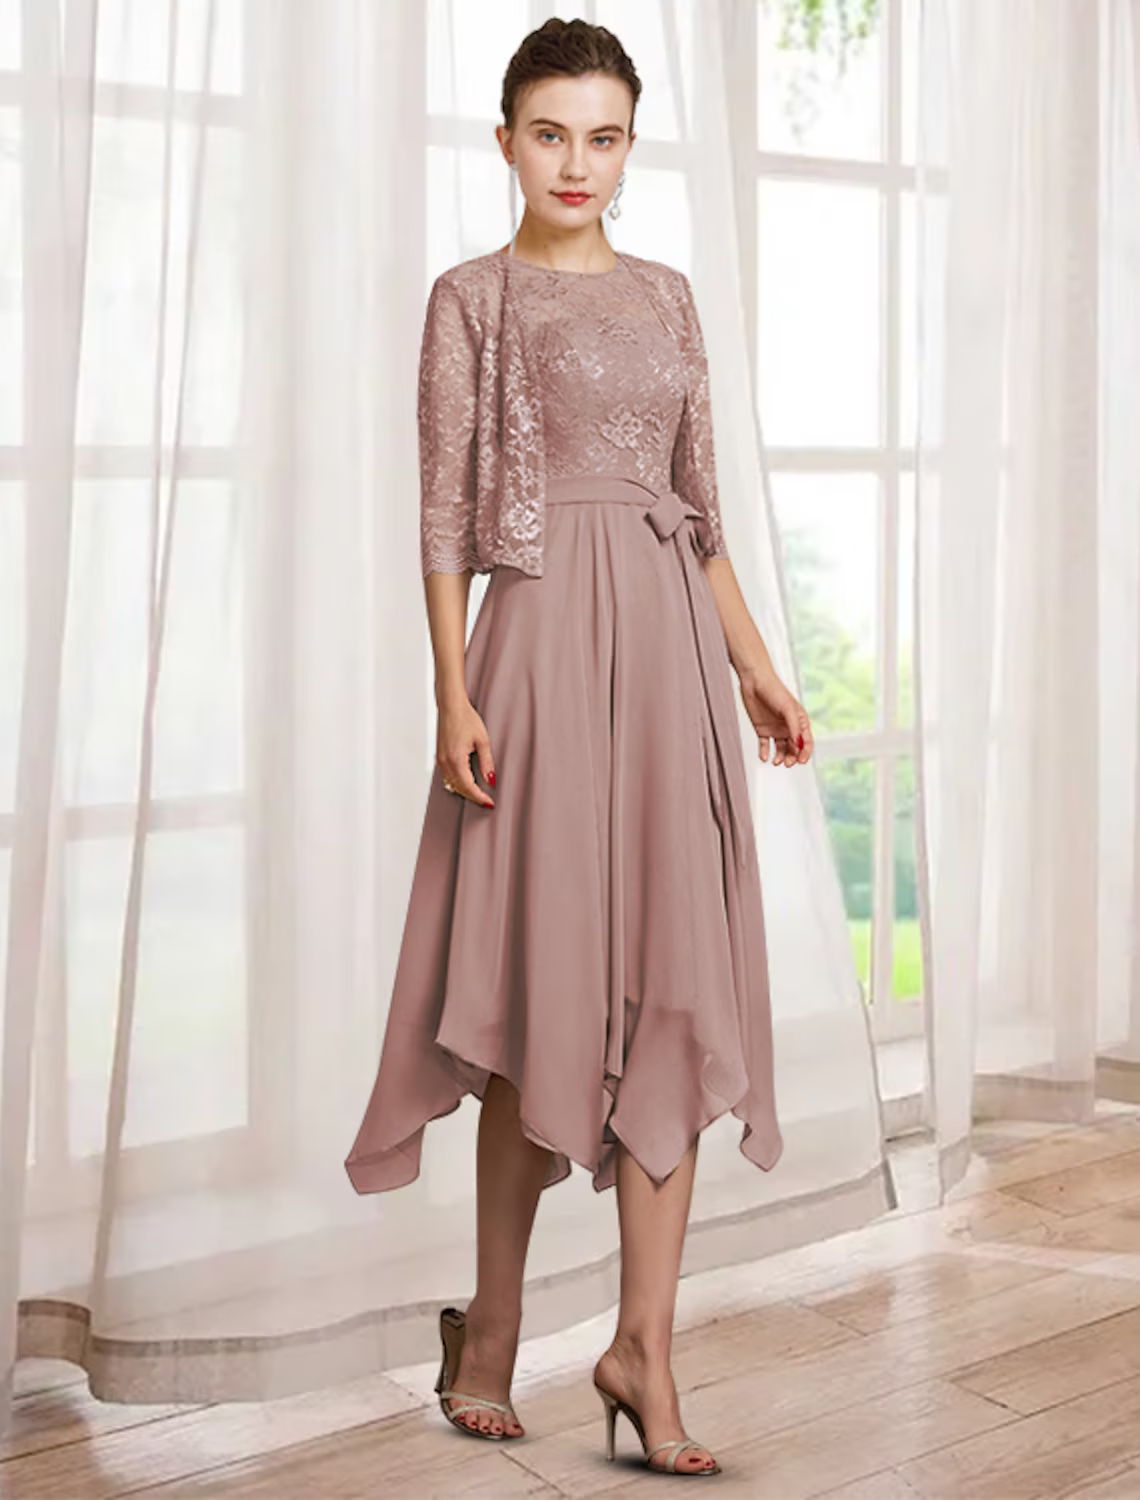 Two Piece A-Line Mother of the Bride Dress Elegant Tea Length Chiffon Lace Half Sleeve Wrap Included with Sash Ribbon